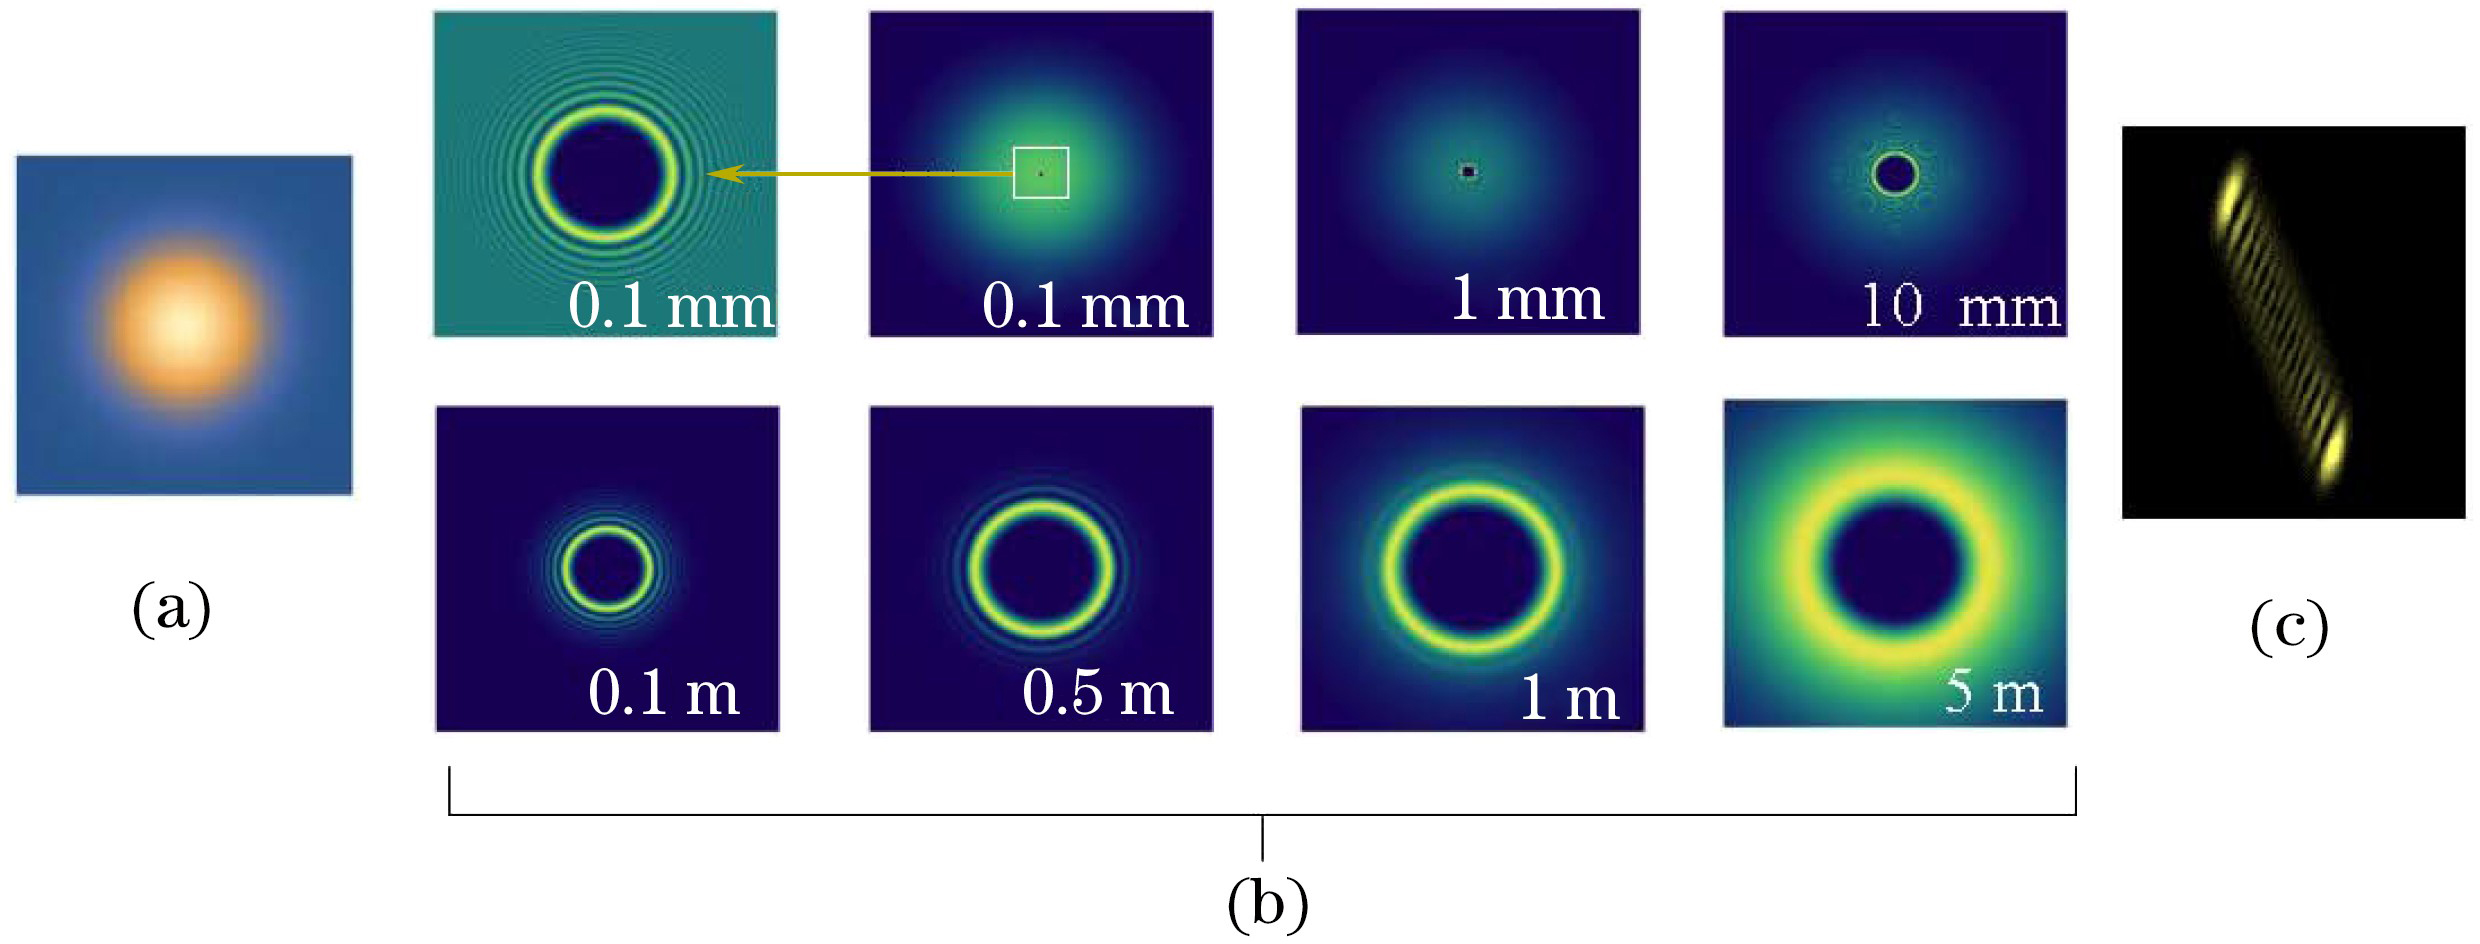 Evolutionary propagation of wave source frequency doubling light and topological charge detection. (a) OAM wave source (fundamental frequency light); (b) propagation and evolution of transverse structure of frequency doubling light; (c) detection results of topological charges by inclined lens method